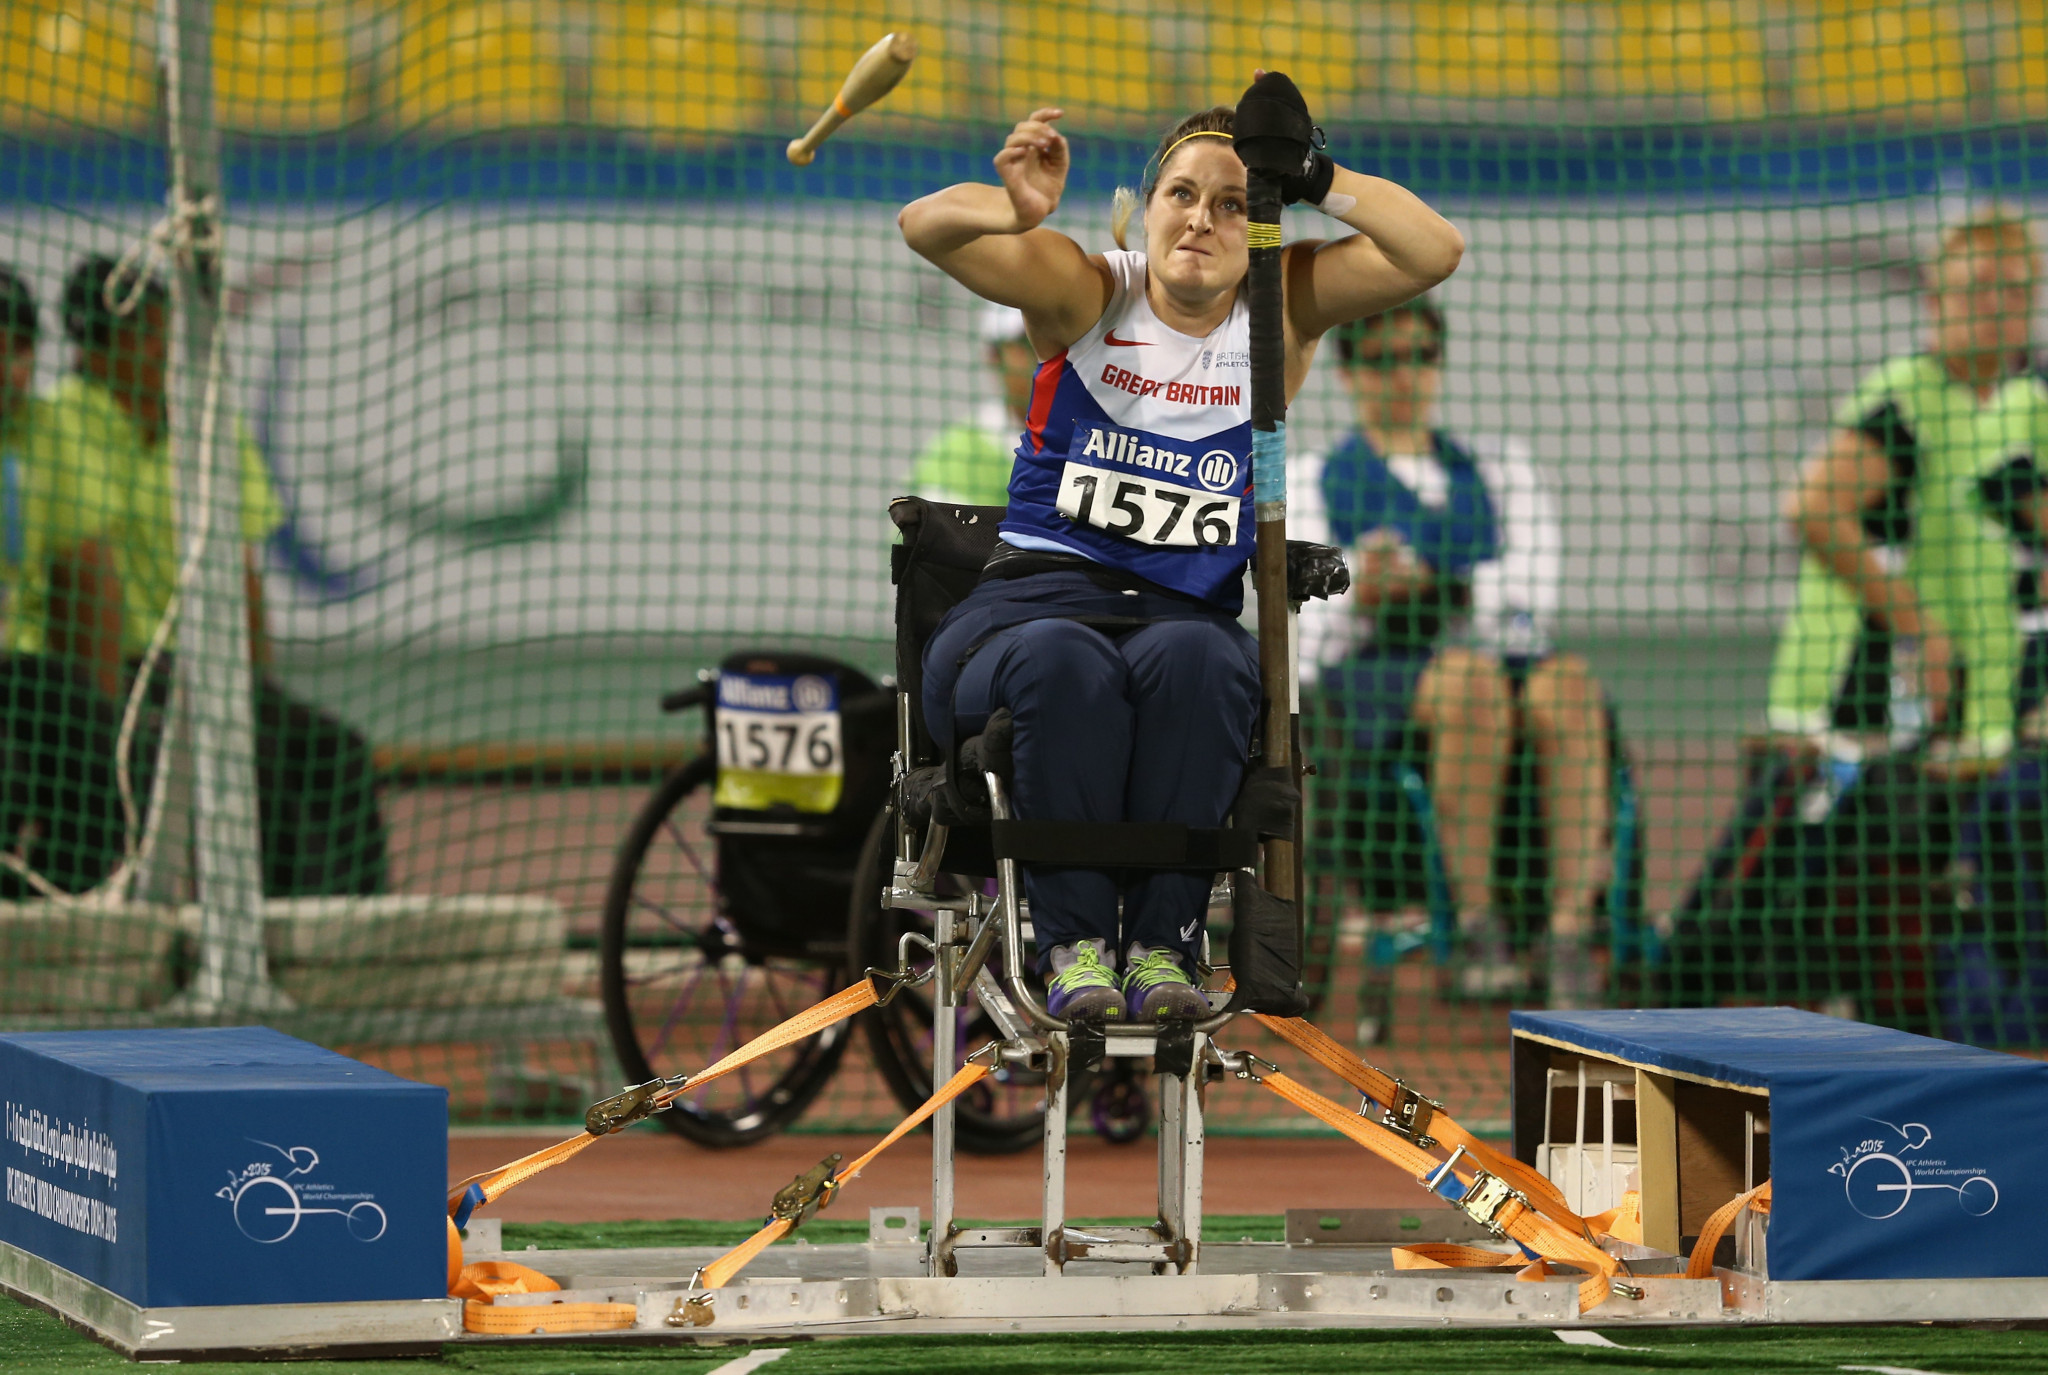 Kylie Grimes competing in the club throw ©Getty Images